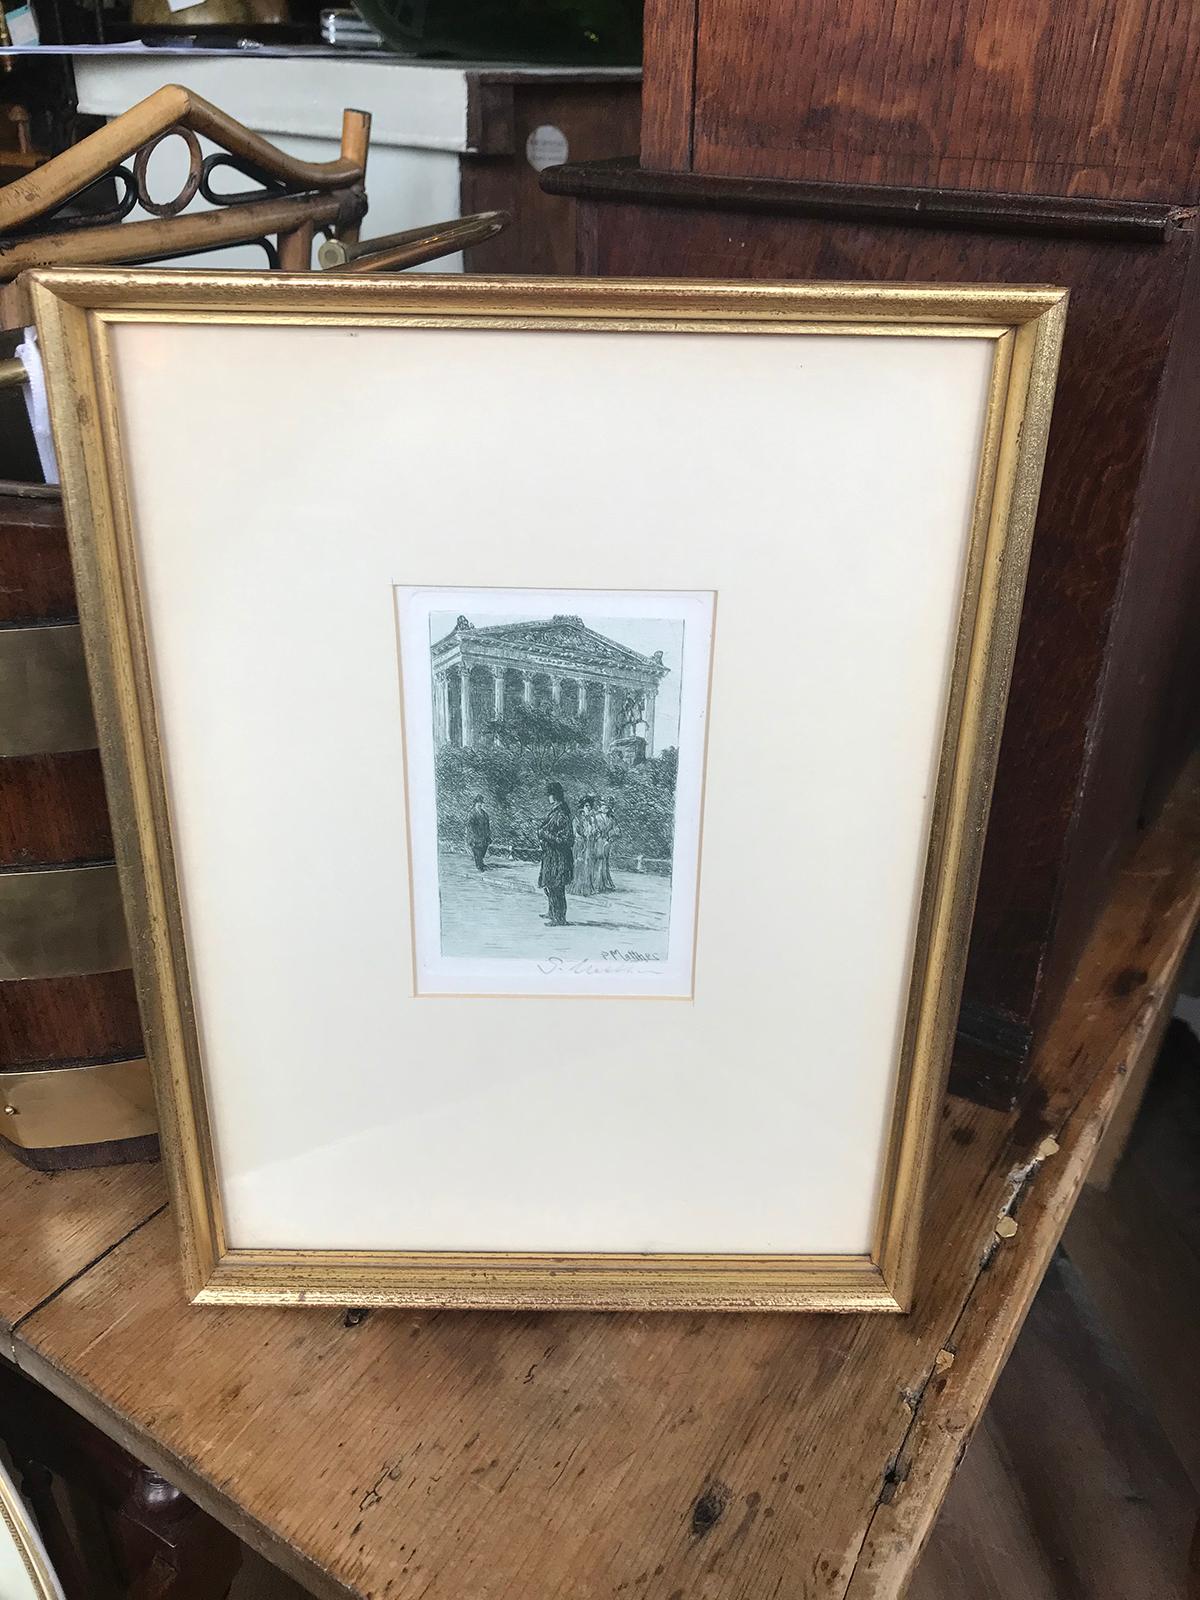 19th Century Engraving by Dutch Artist Oskar Paul Matthew Signed and Framed In Good Condition For Sale In Atlanta, GA